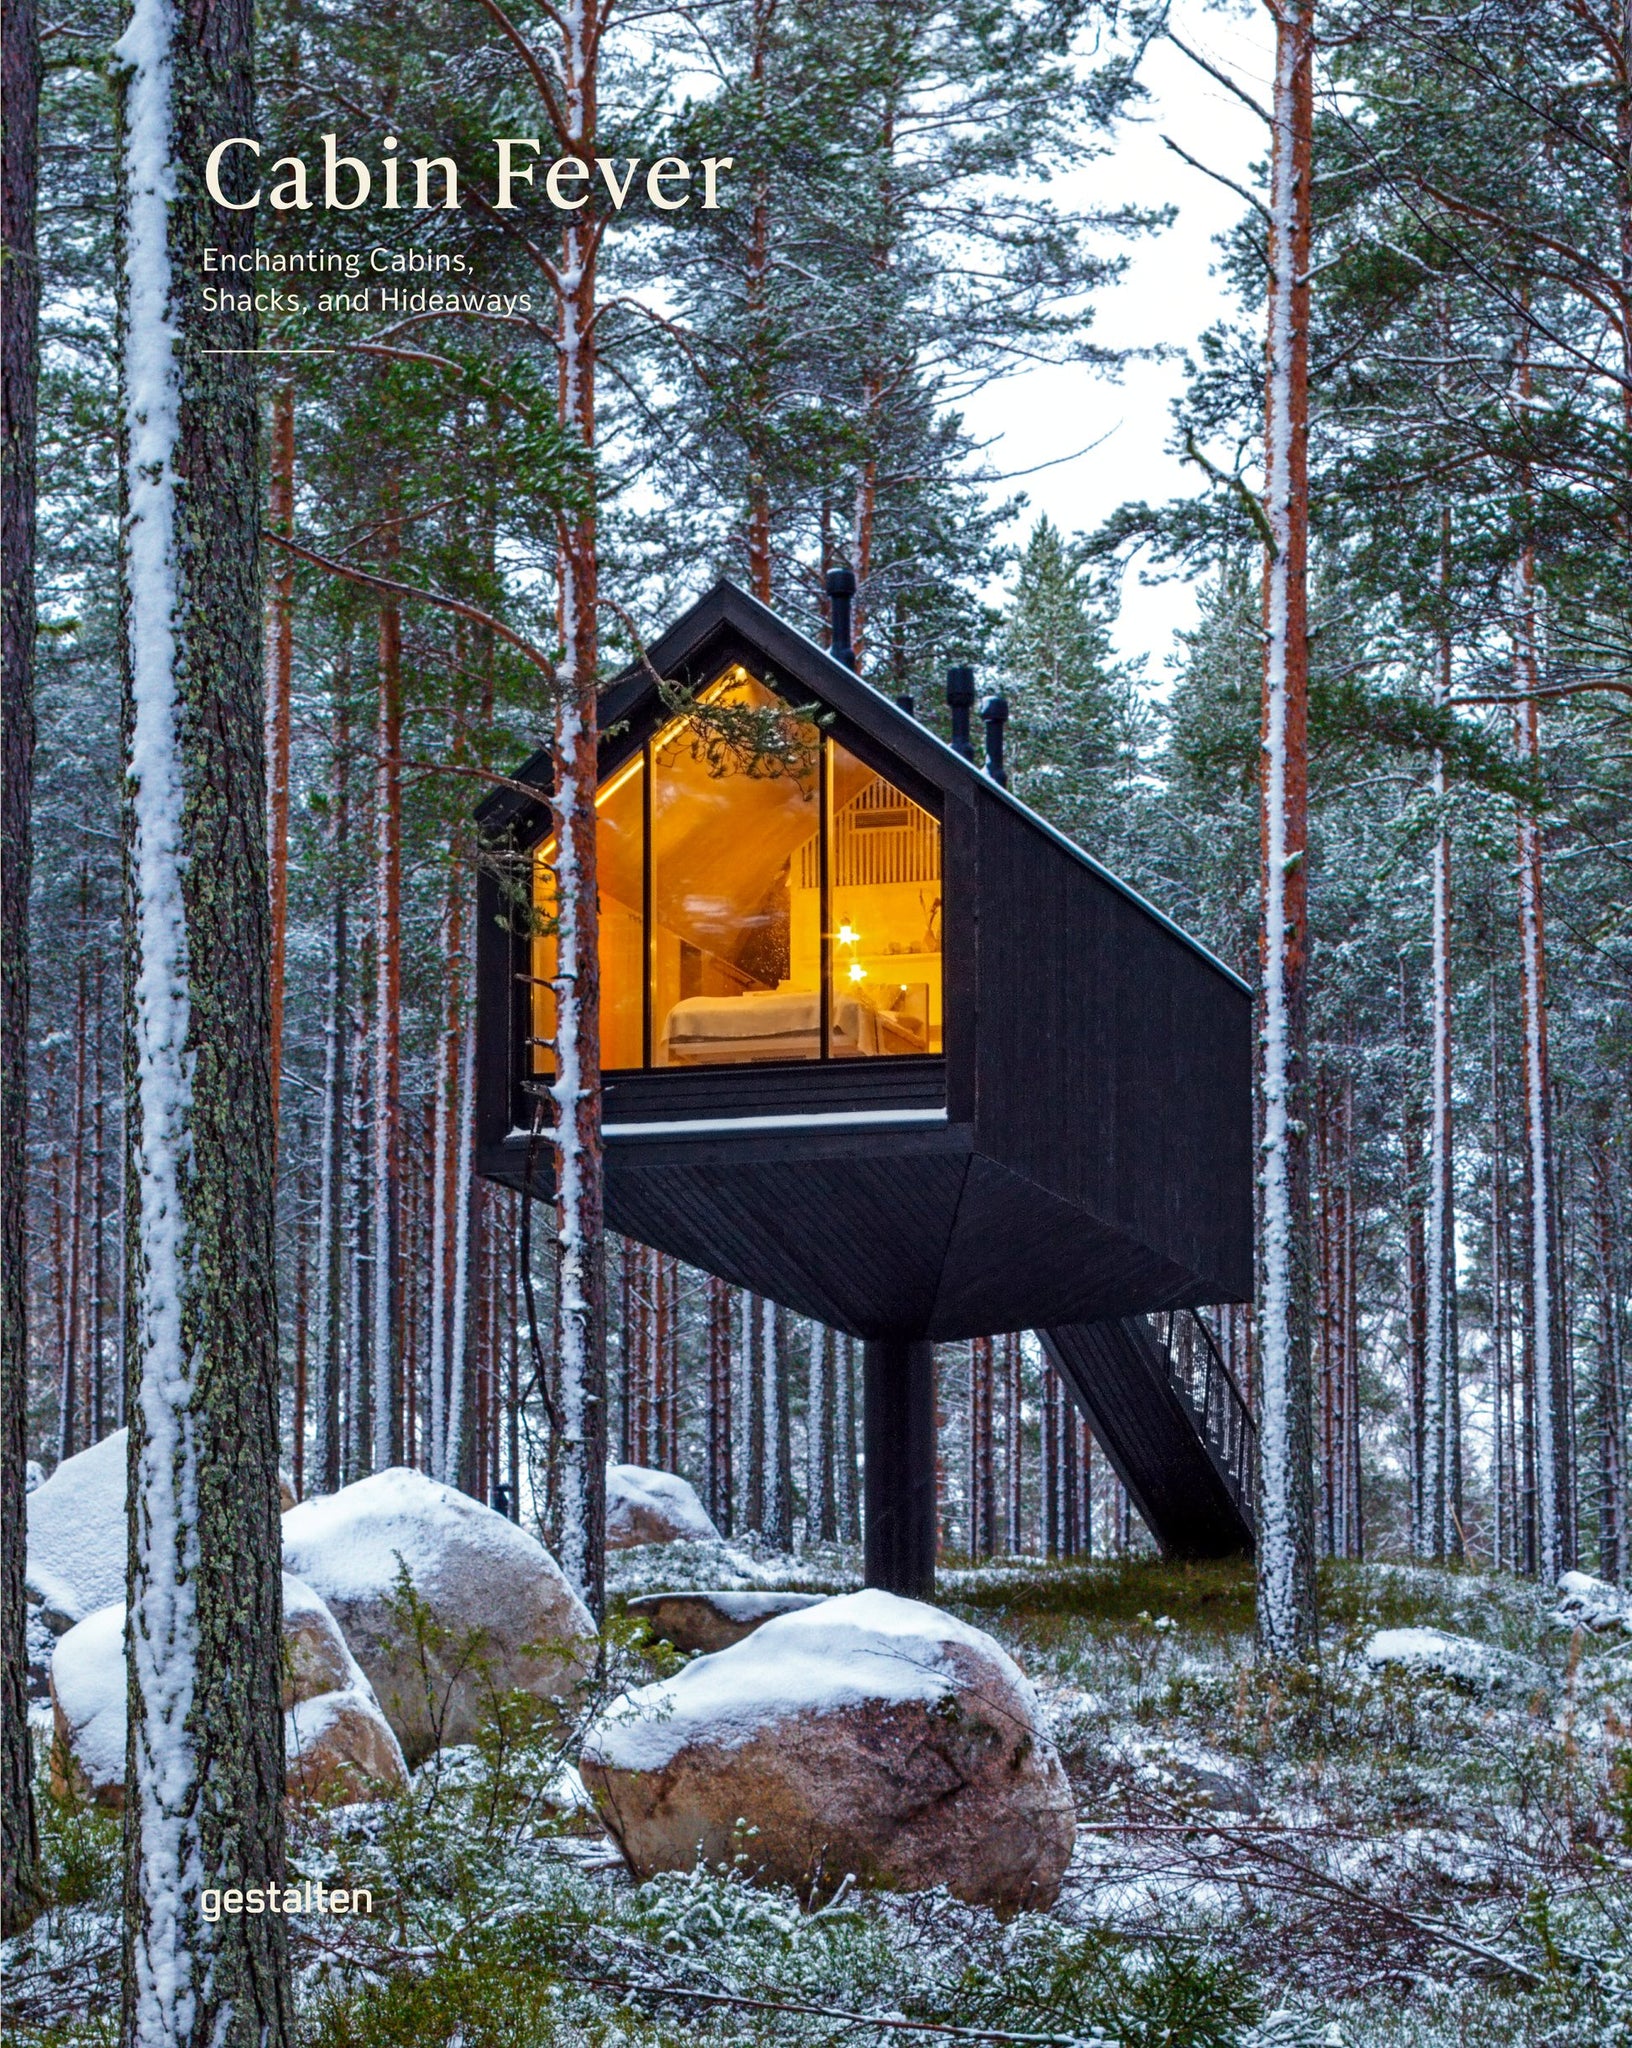 Cabin Fever: Enchanting Cabins, Shacks and Hideaways